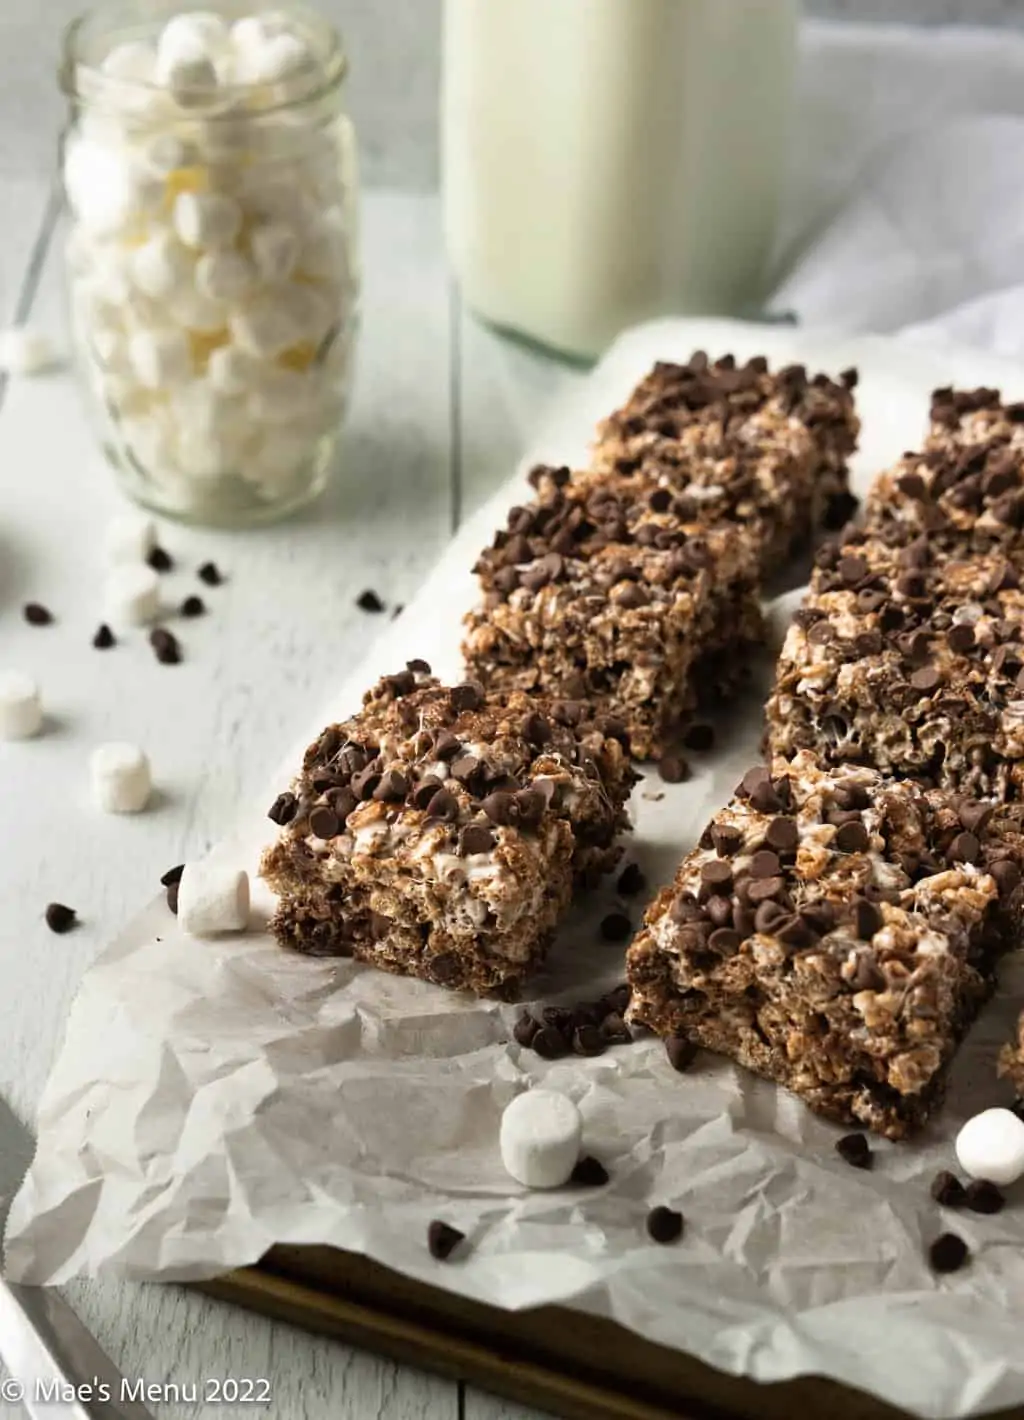 This is an image of chocolate rice crispy treats from Mae's Menu.